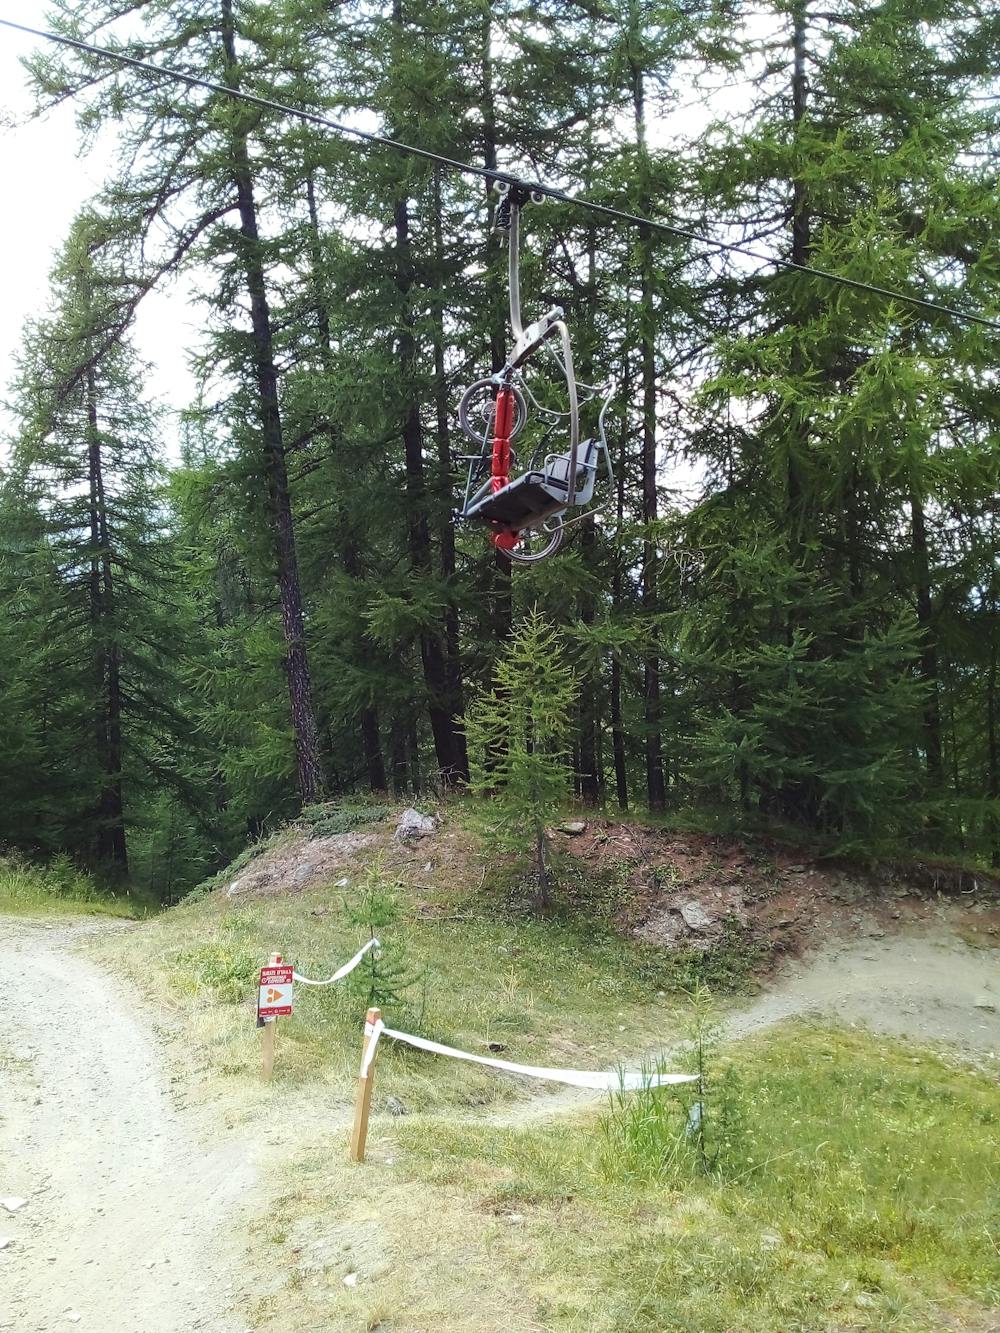 The chairlift right above the line